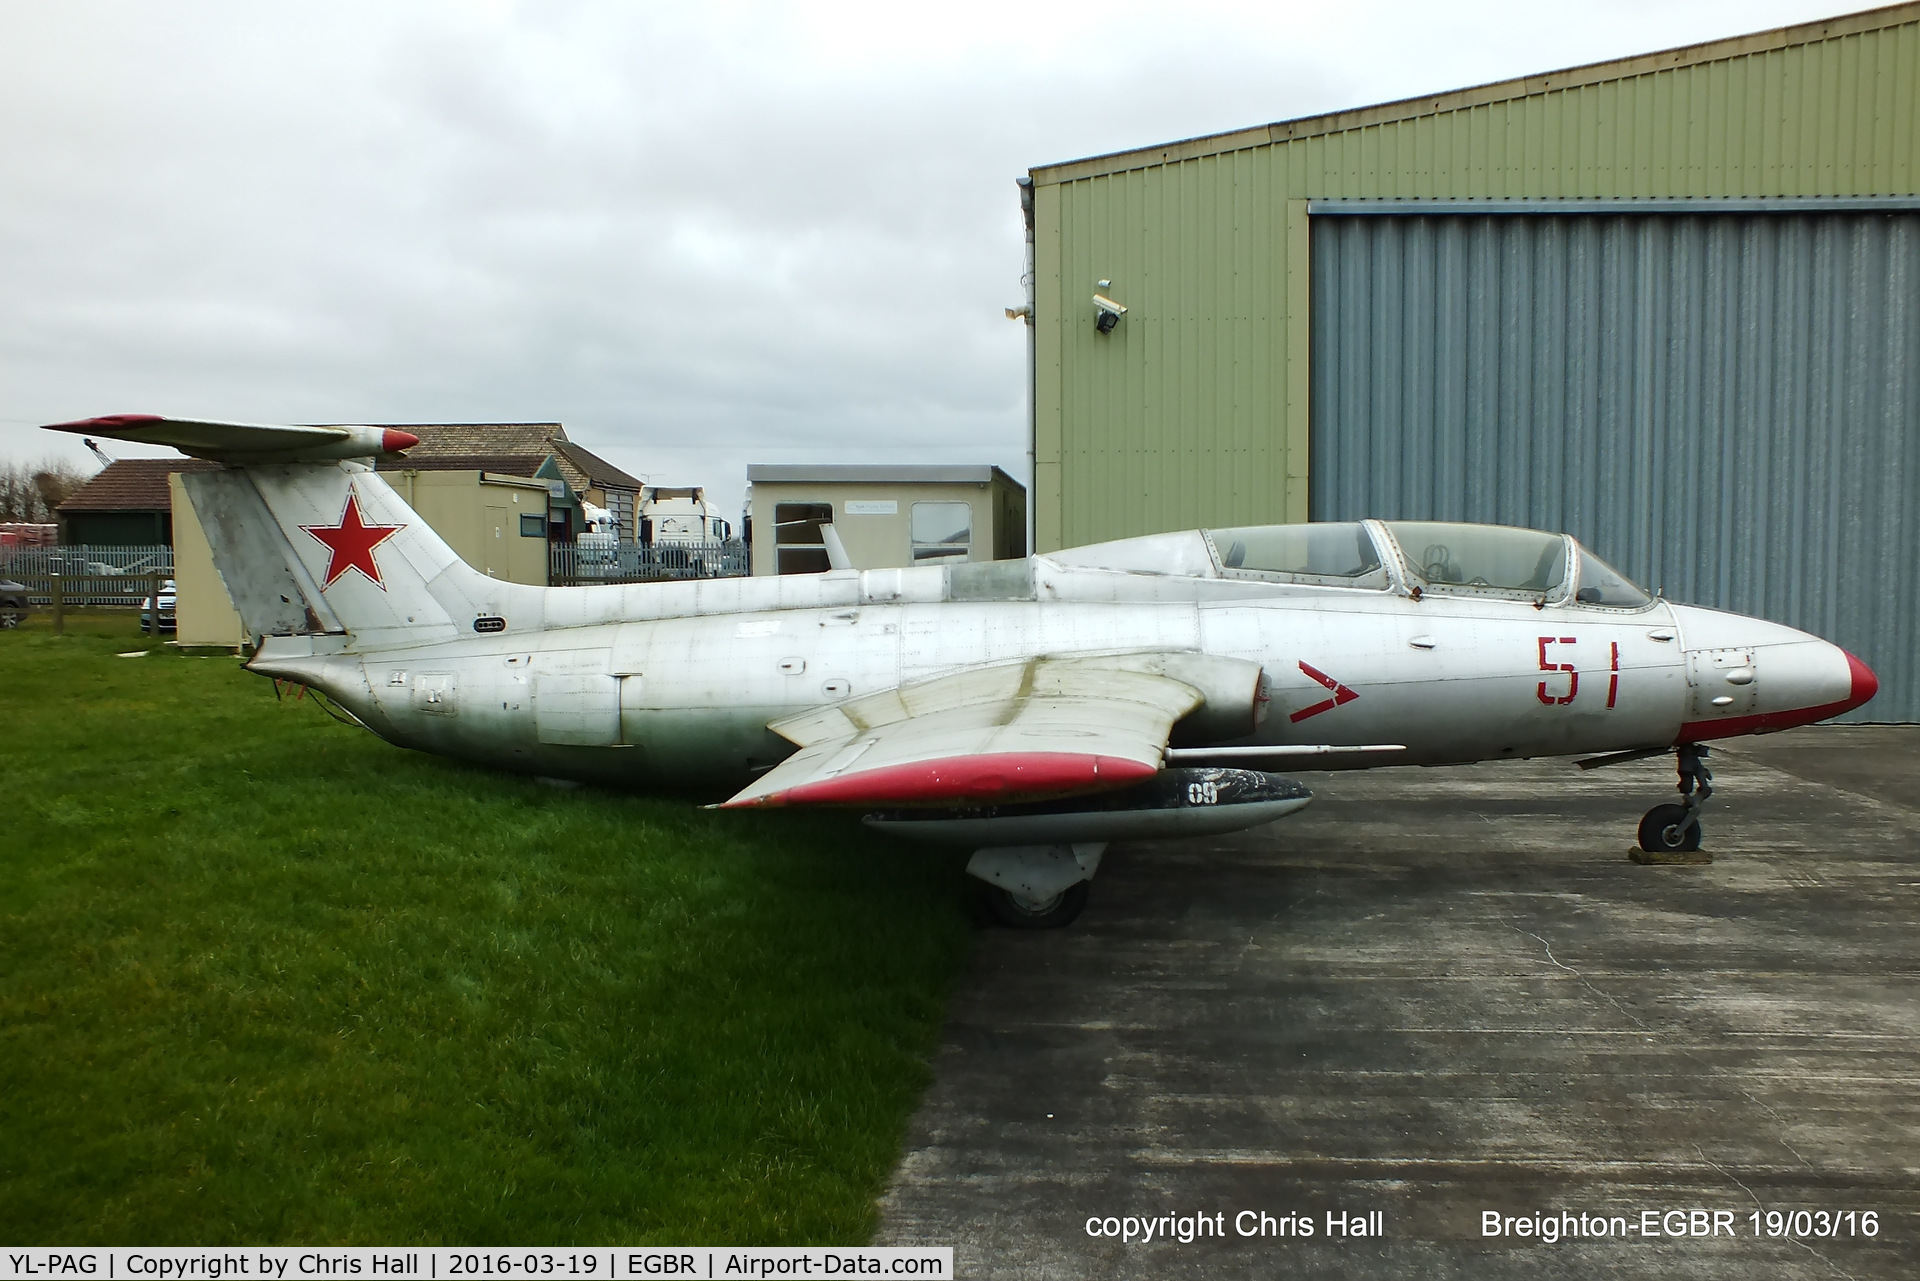 YL-PAG, Aero L-29 Delfin C/N 491273, Breighton gate guard moved to the hangars for the winter, it will be cleaned before it returns to guard duties